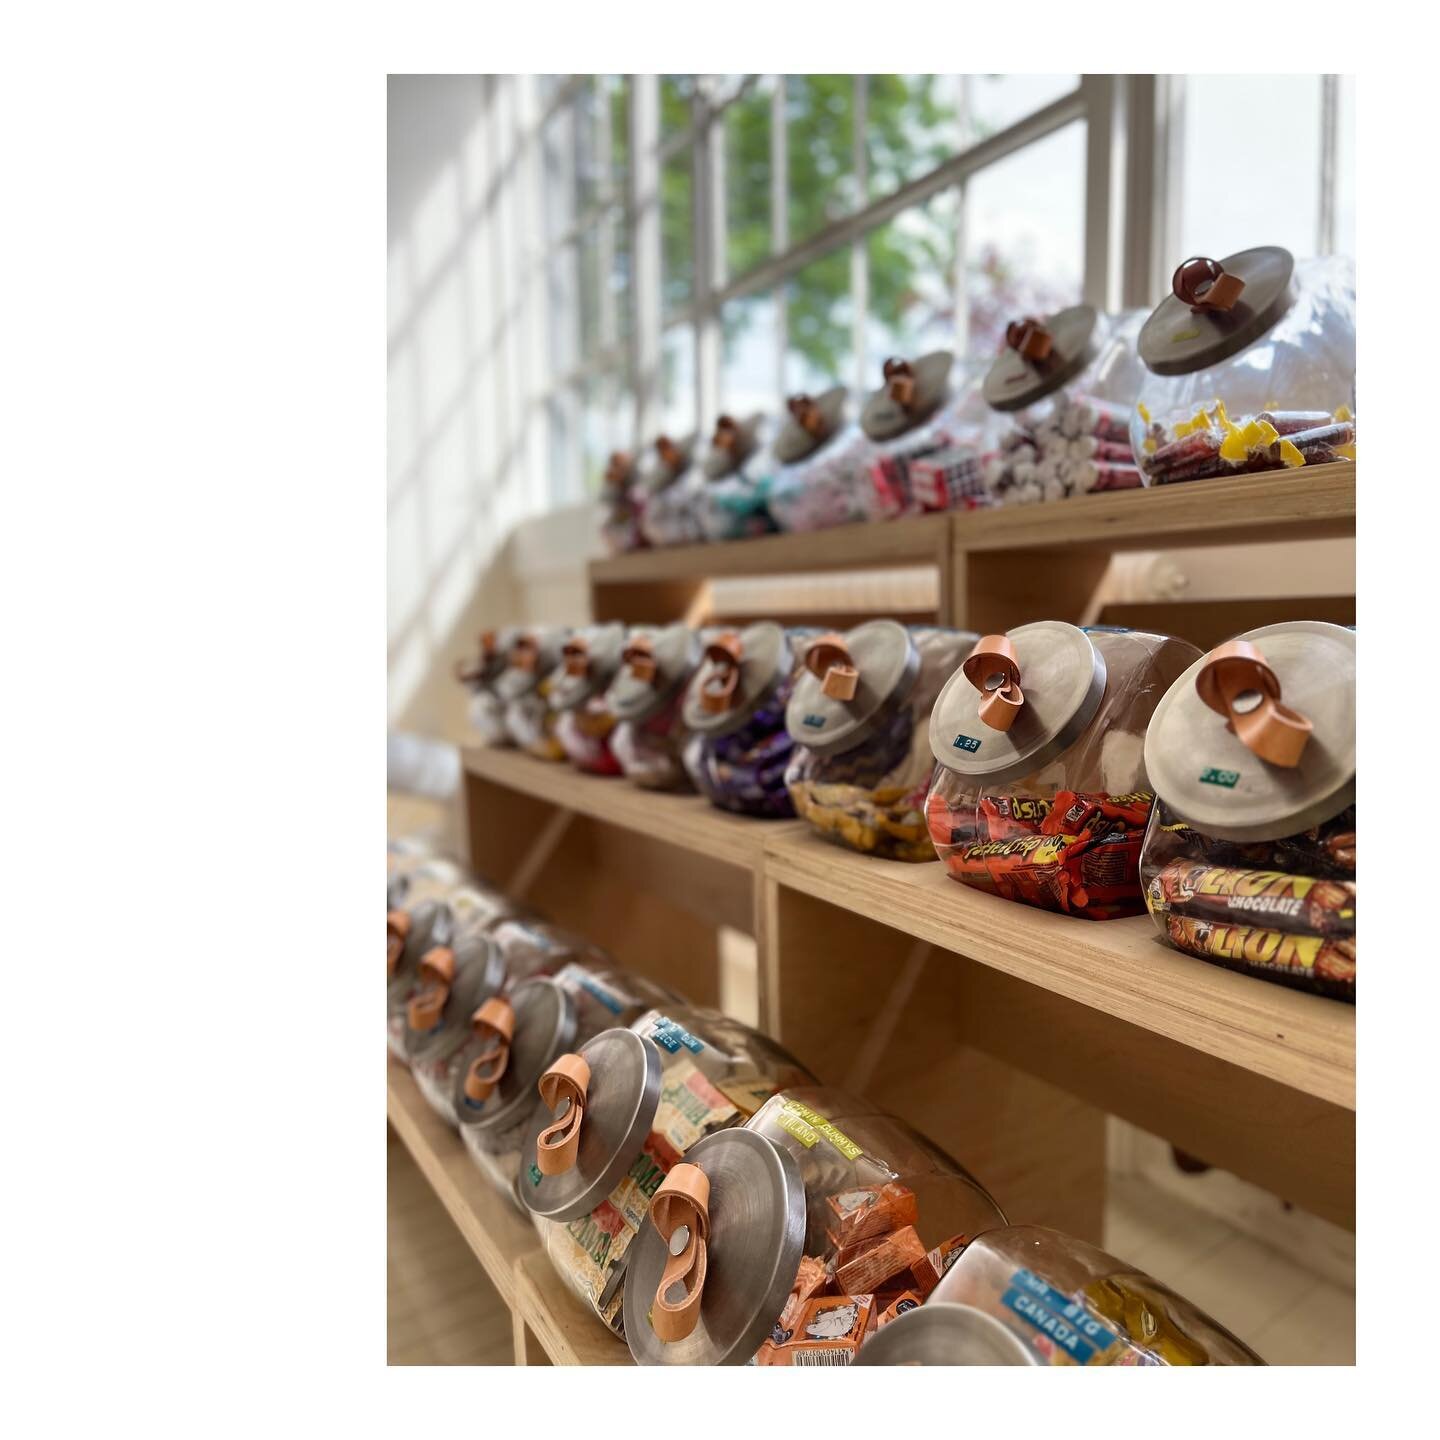 With our hat-tilt to Kinderhook&rsquo;s beloved Treasure Shop &hellip; OKP takes great fun in sourcing the veryyyy best in &lsquo;penny candy&rsquo;. Chocolates, Sweets, Chews, Licorice + beyond come from all parts of the globe.  Finland, Greece, Eng